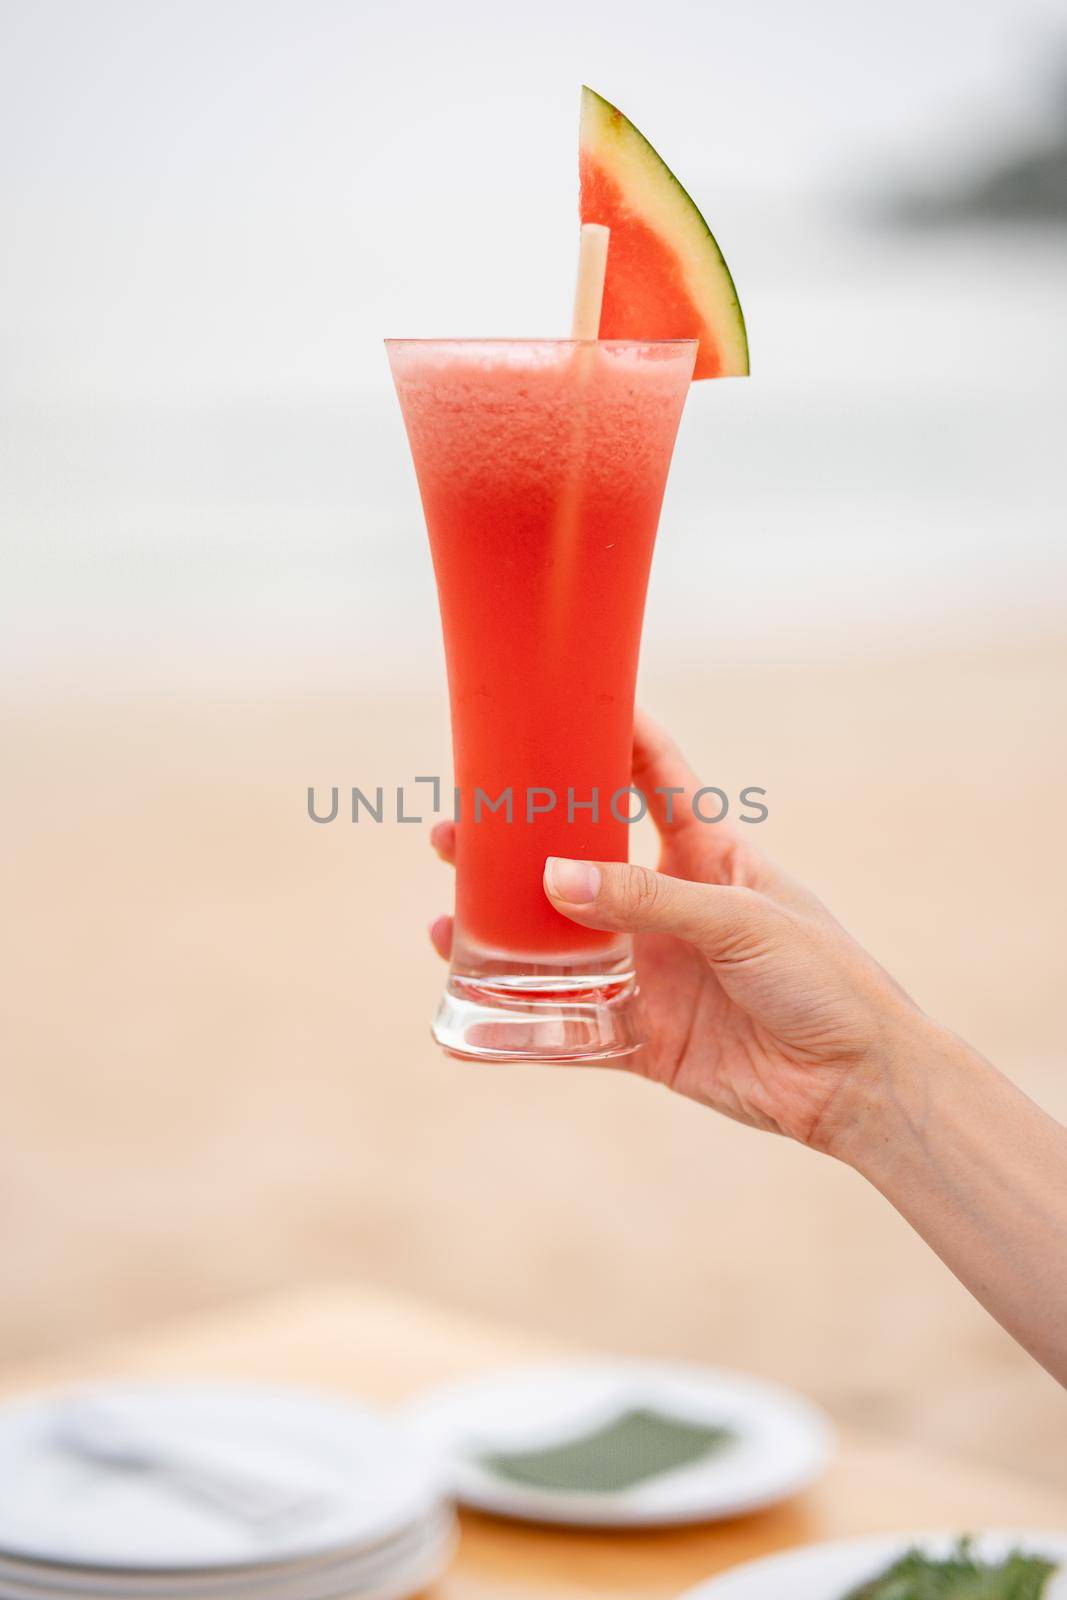 Glass of watermelon juice with blur ocean background.